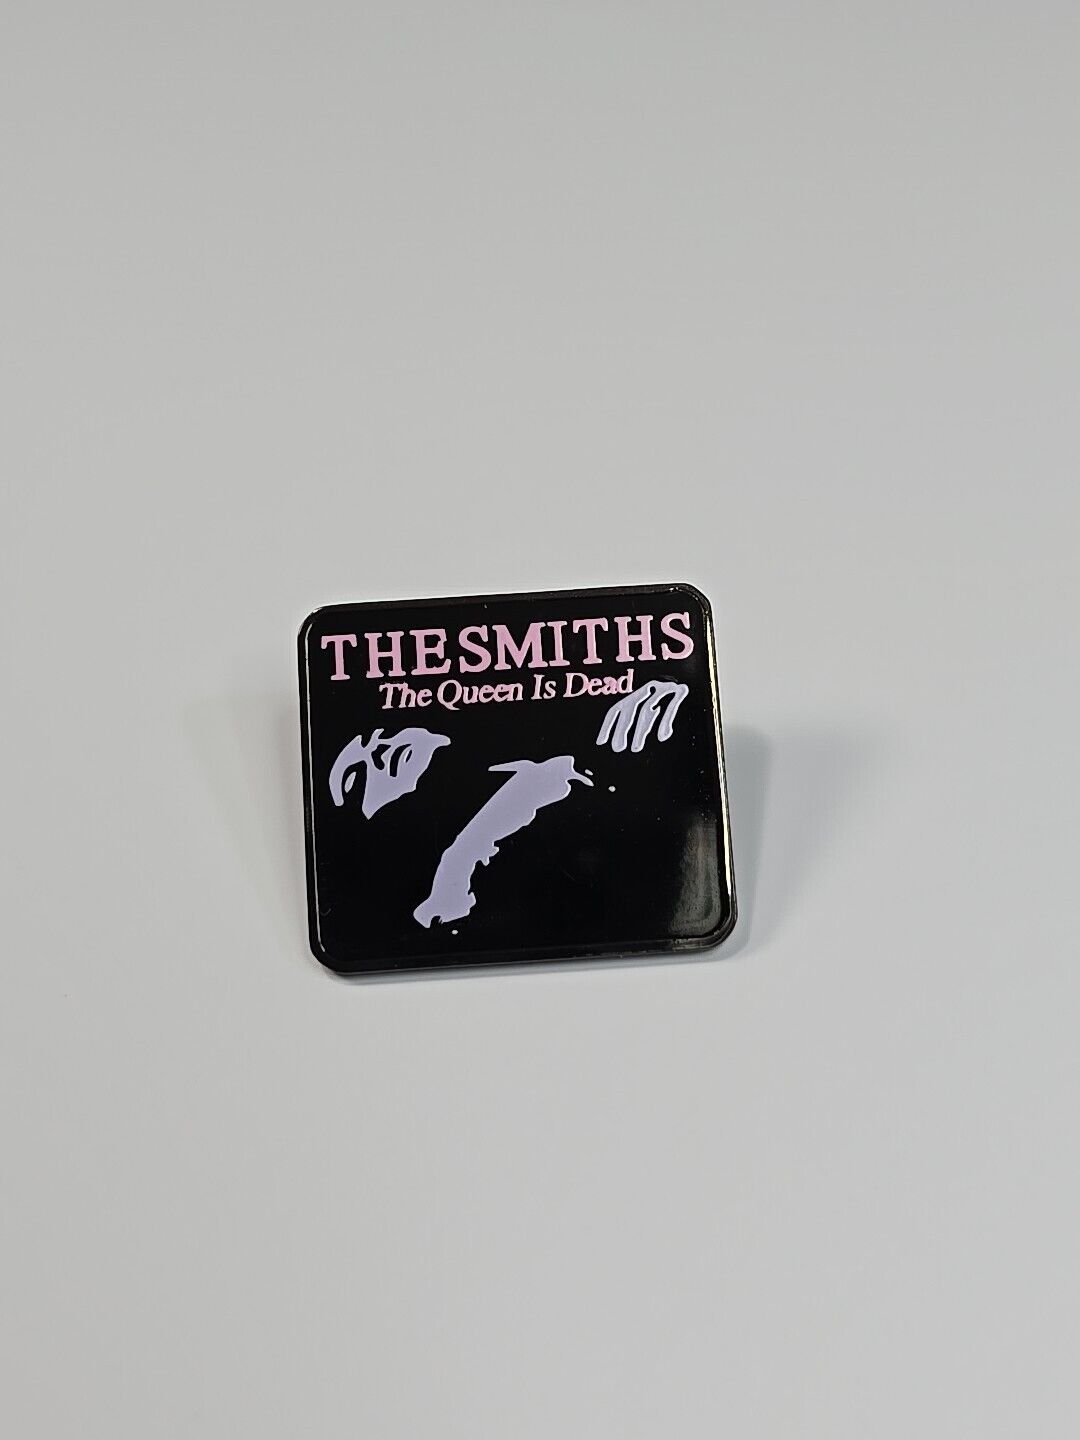 The Smiths Lapel Pin 1980s English Rock Band **